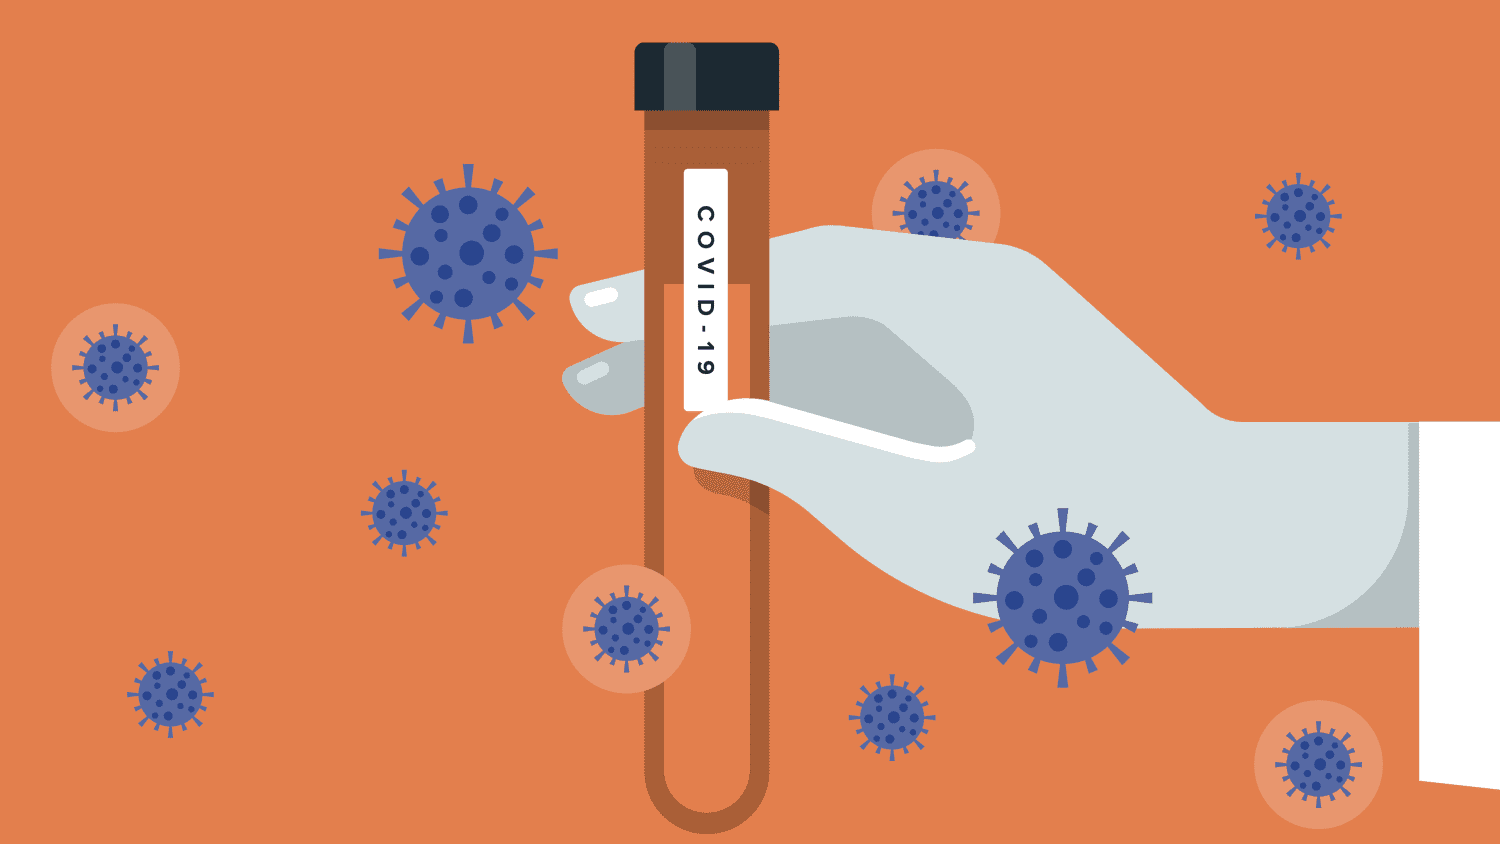 An illustration of a Covid-19 vaccine vial